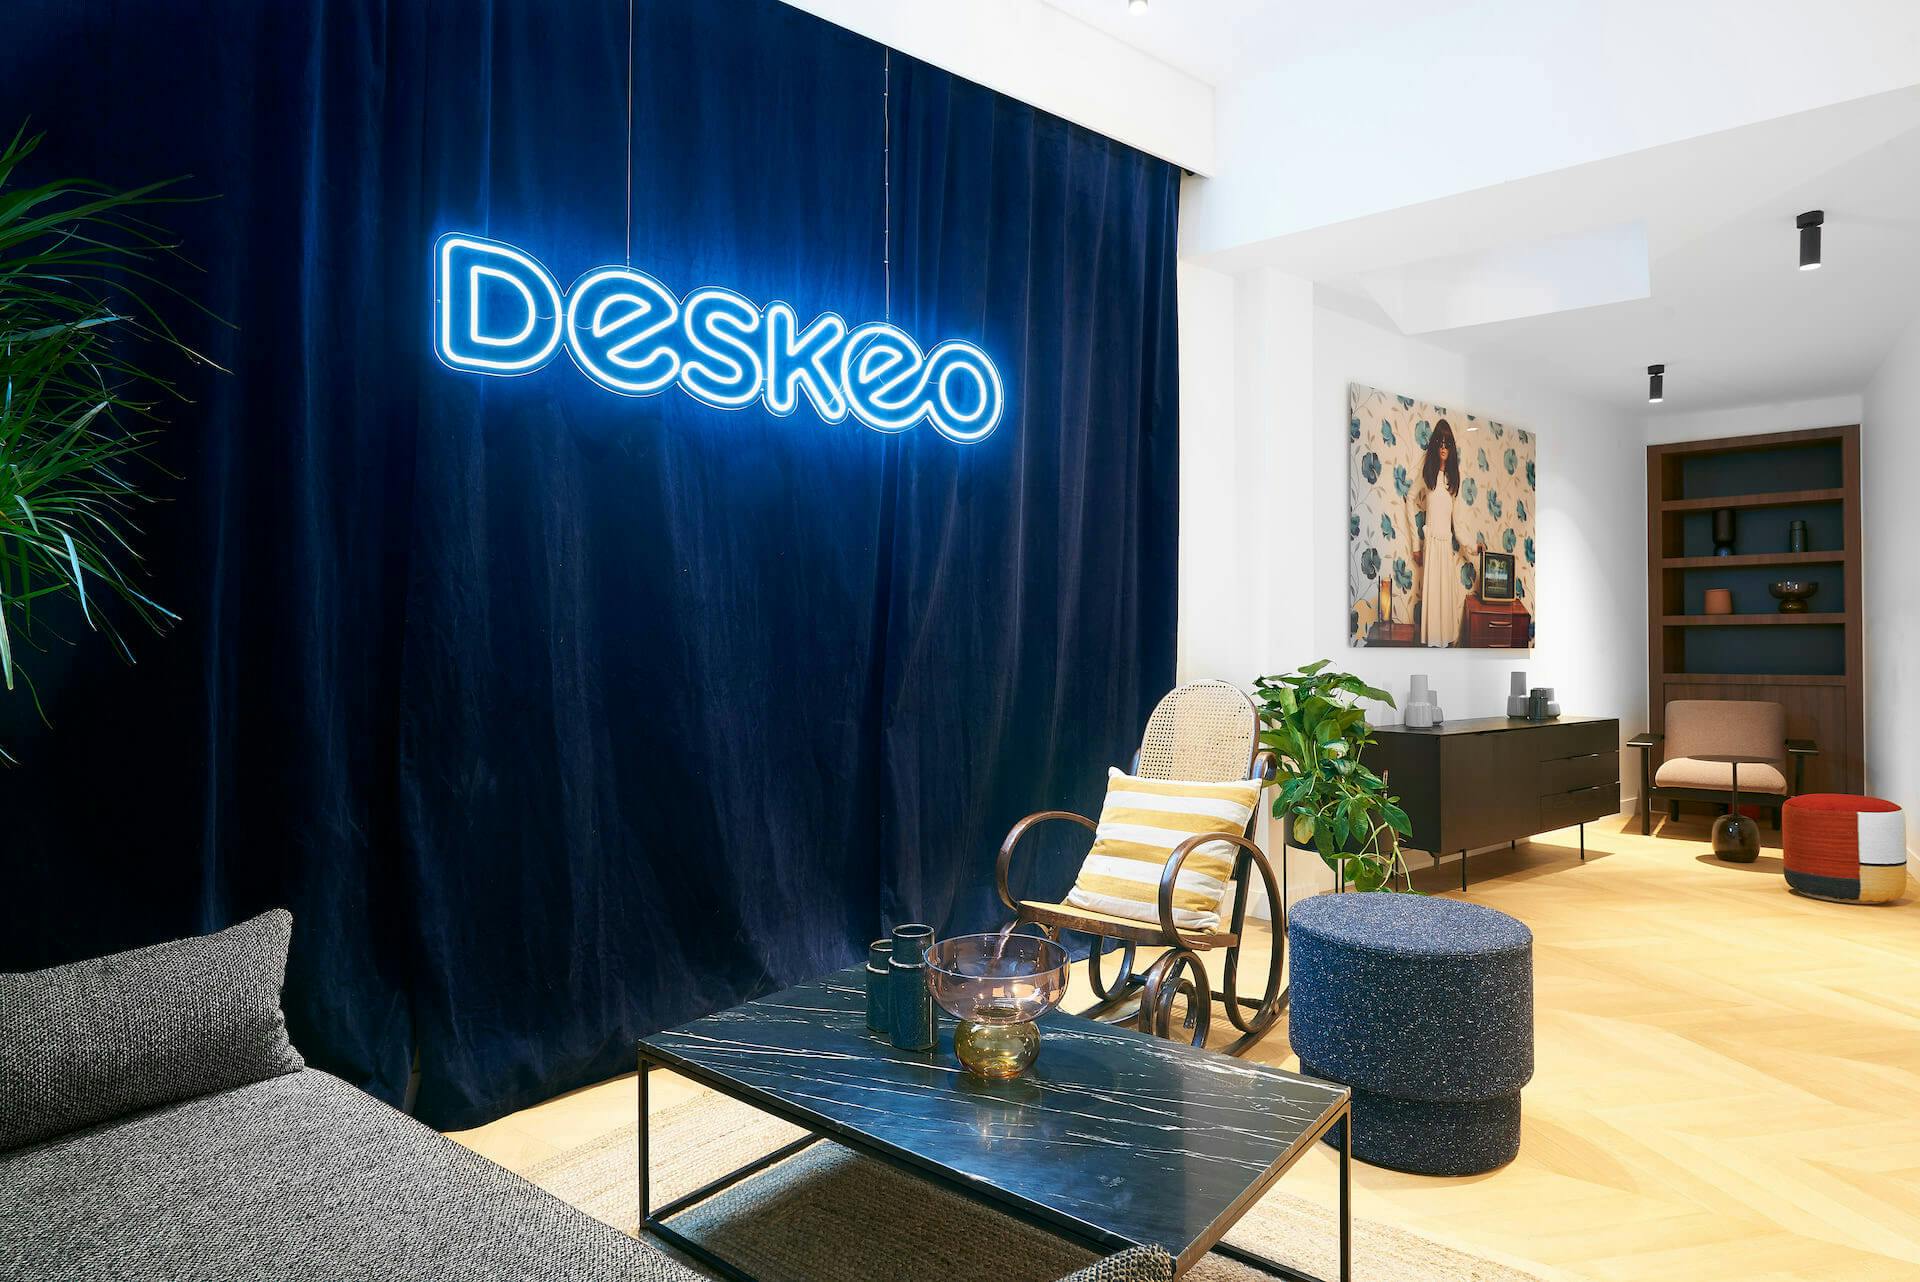 Deskeo, official partner of the SIMI 2019